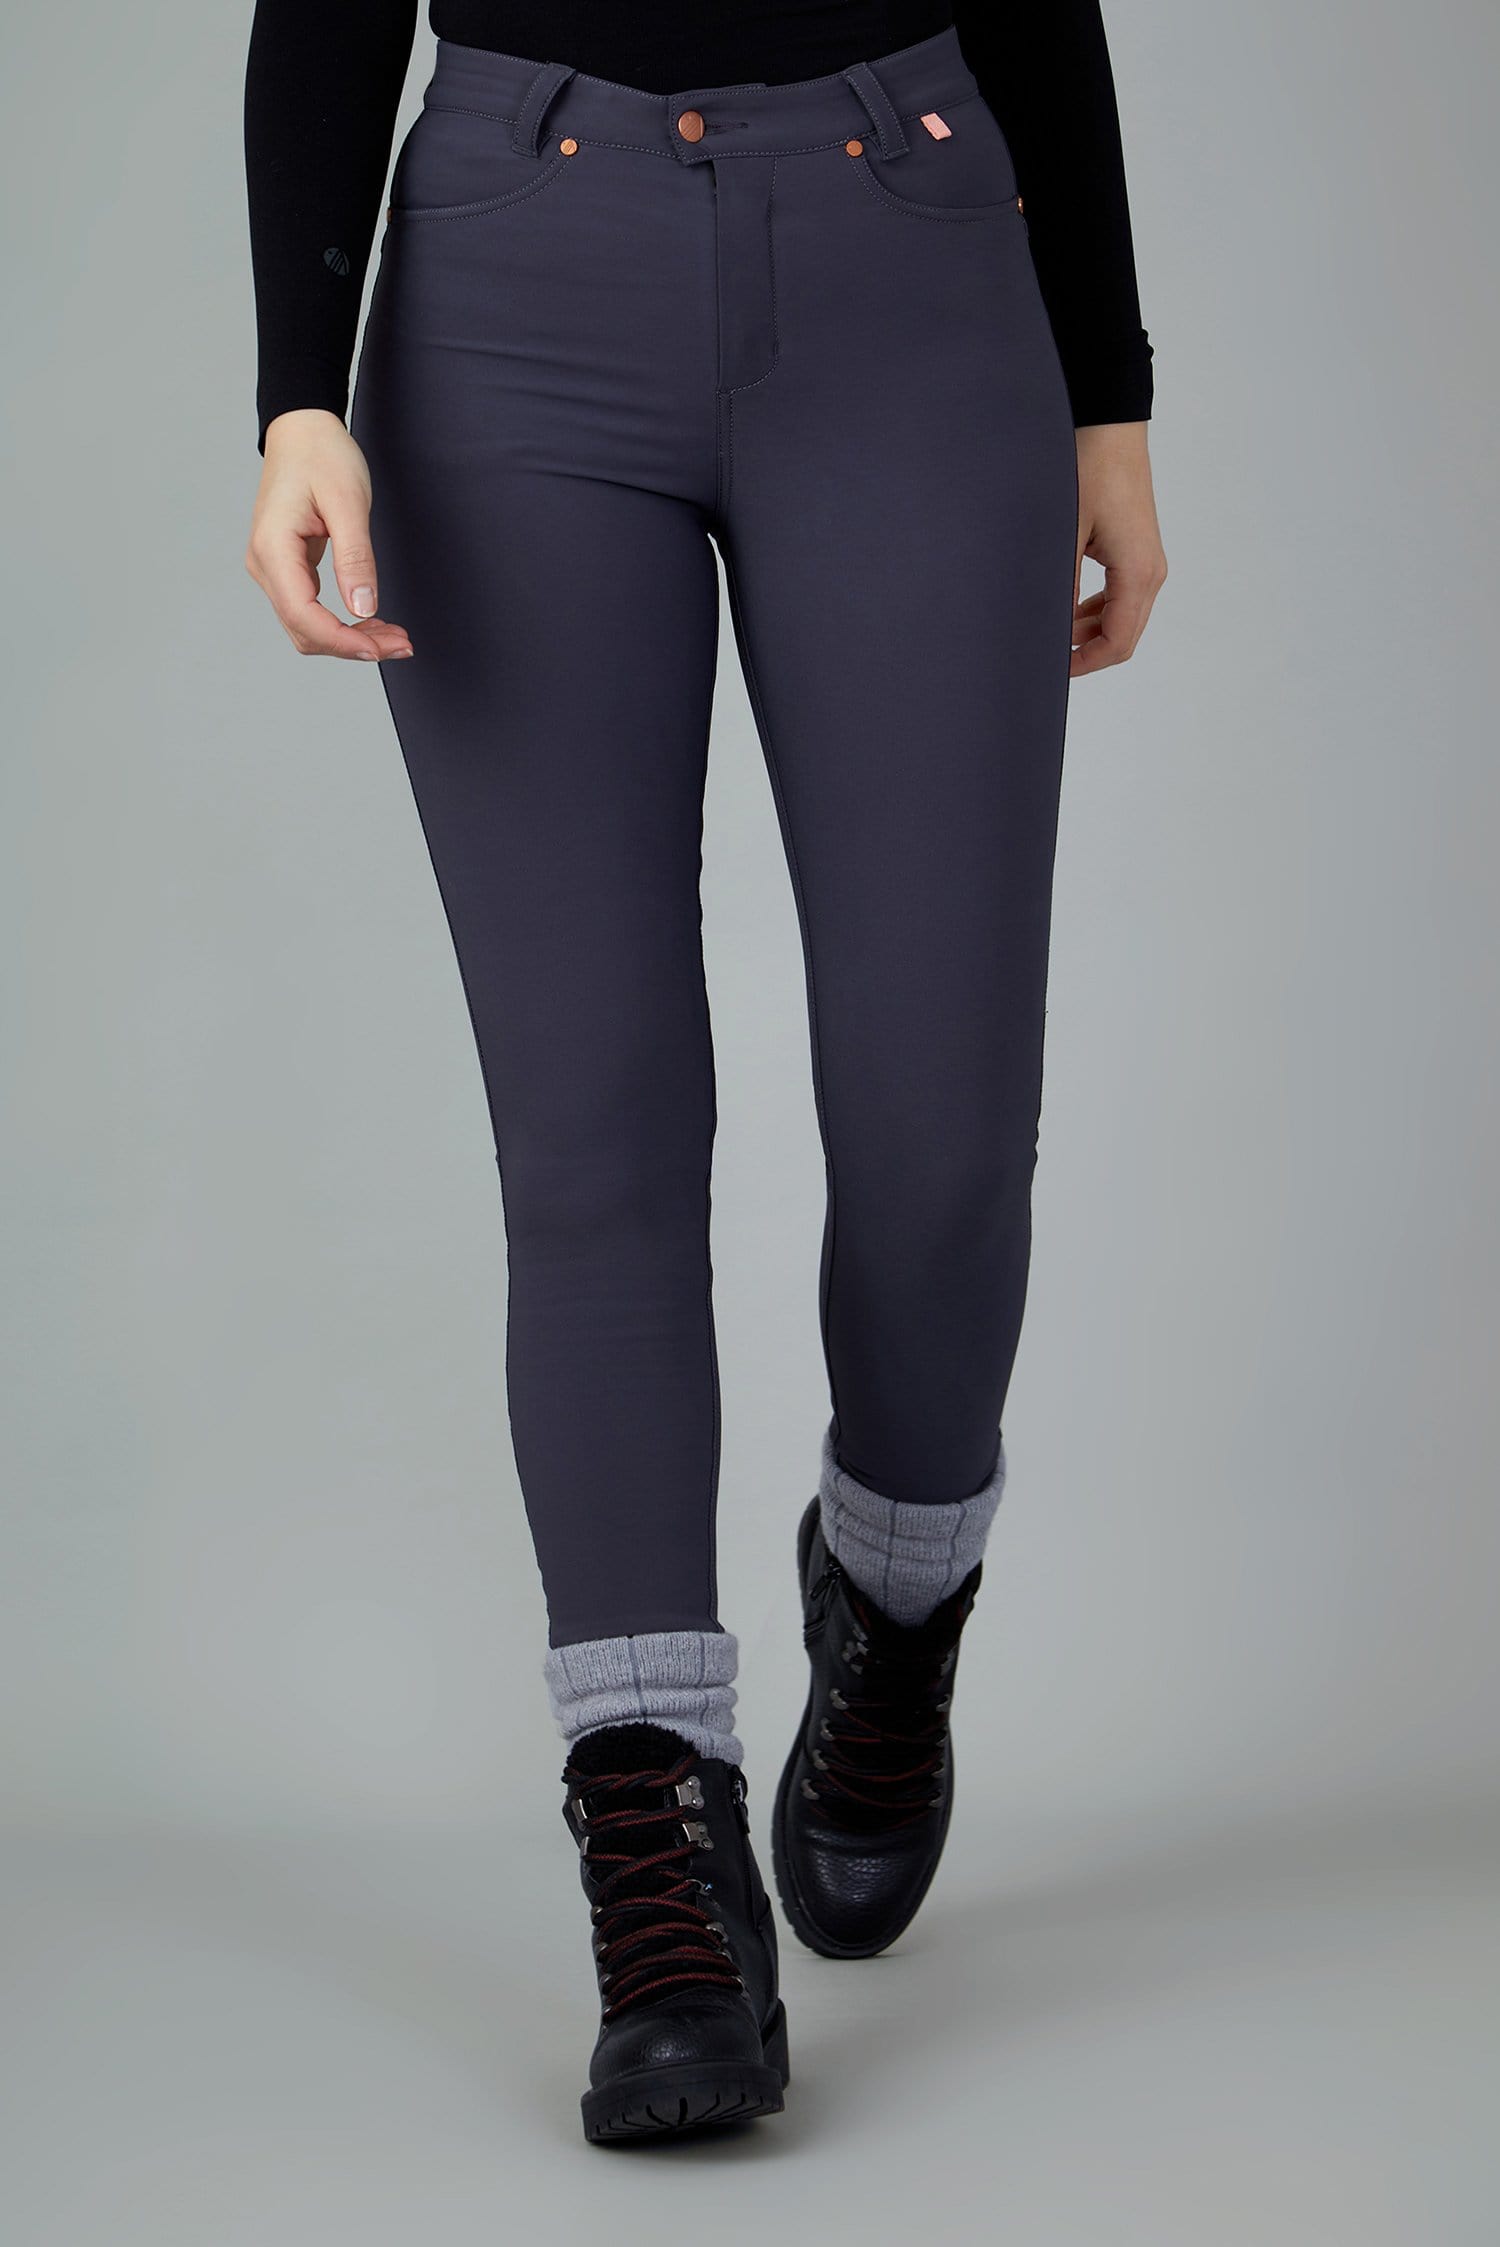 The Aventurite Stretch Skinny Outdoor Trousers - Obsidian - 32xl / Uk14 - Womens - Acai Outdoorwear